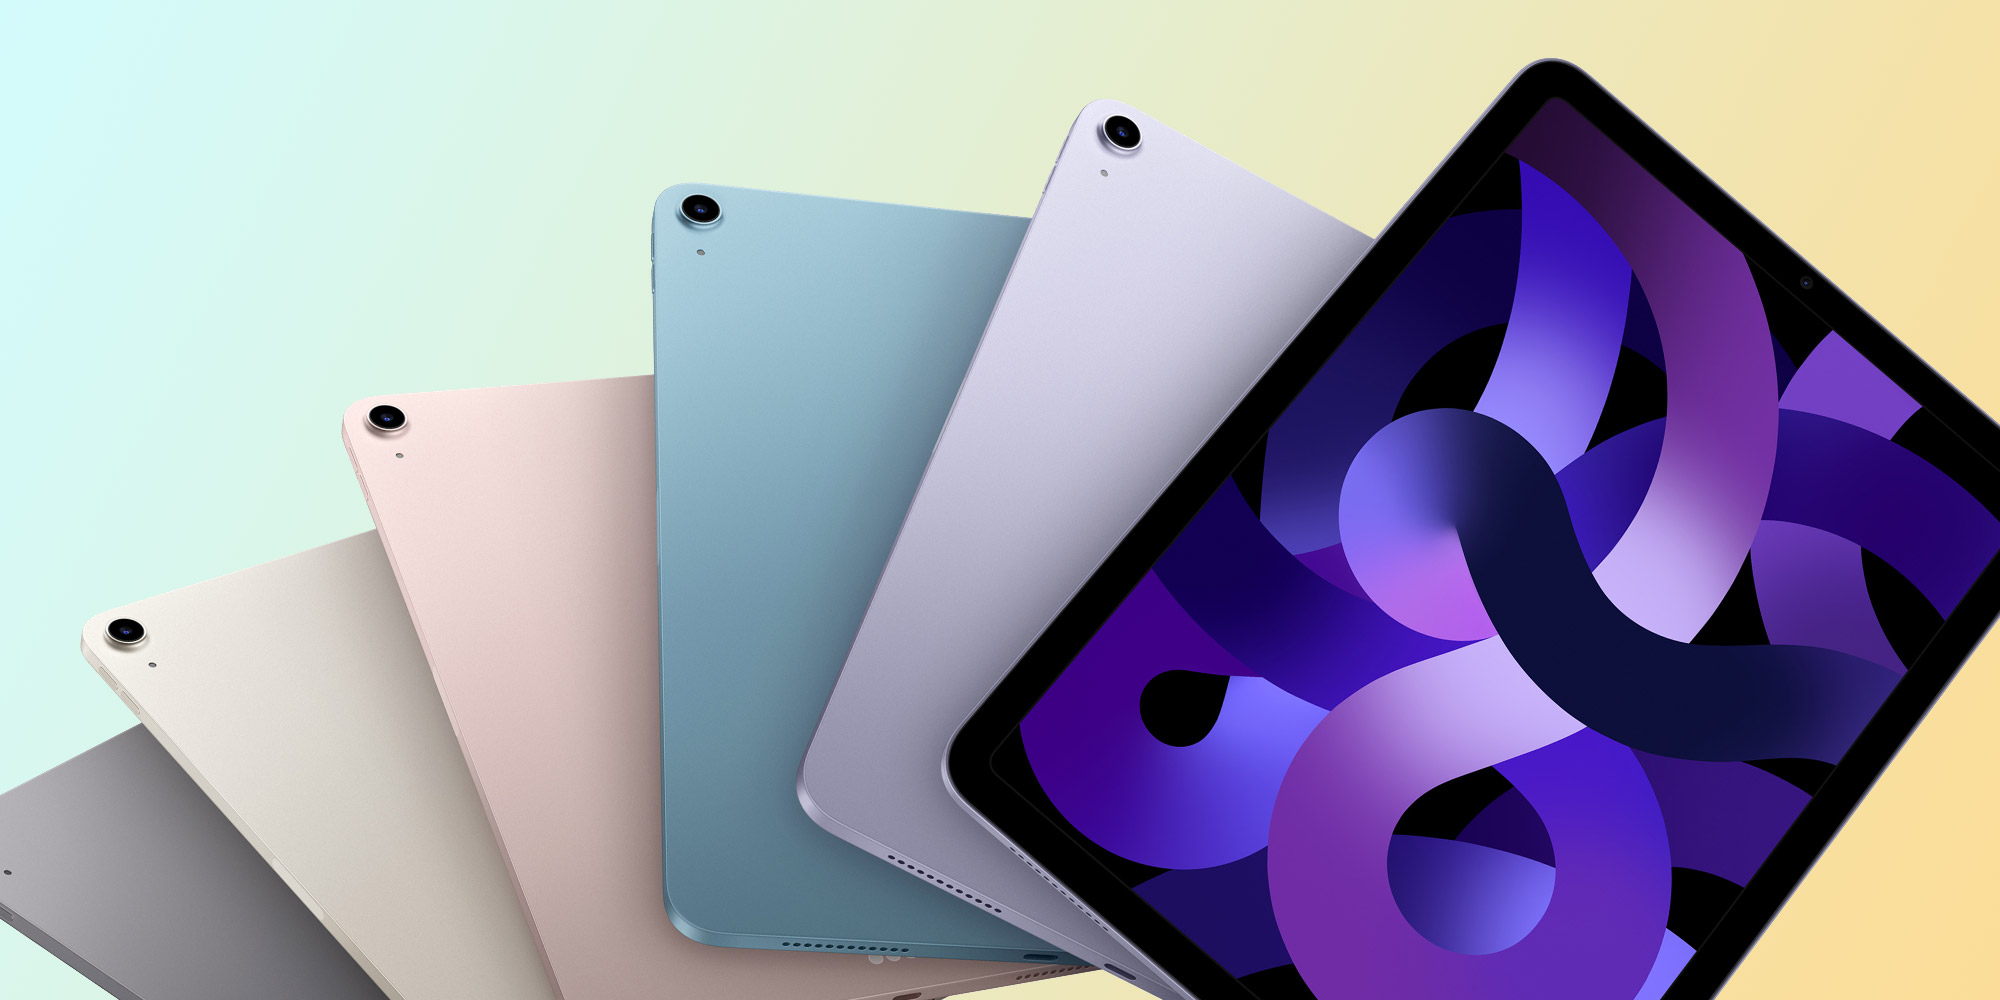 iPad Air 5 - Here's what Apple didn't announce at its 'Wonderlust' event